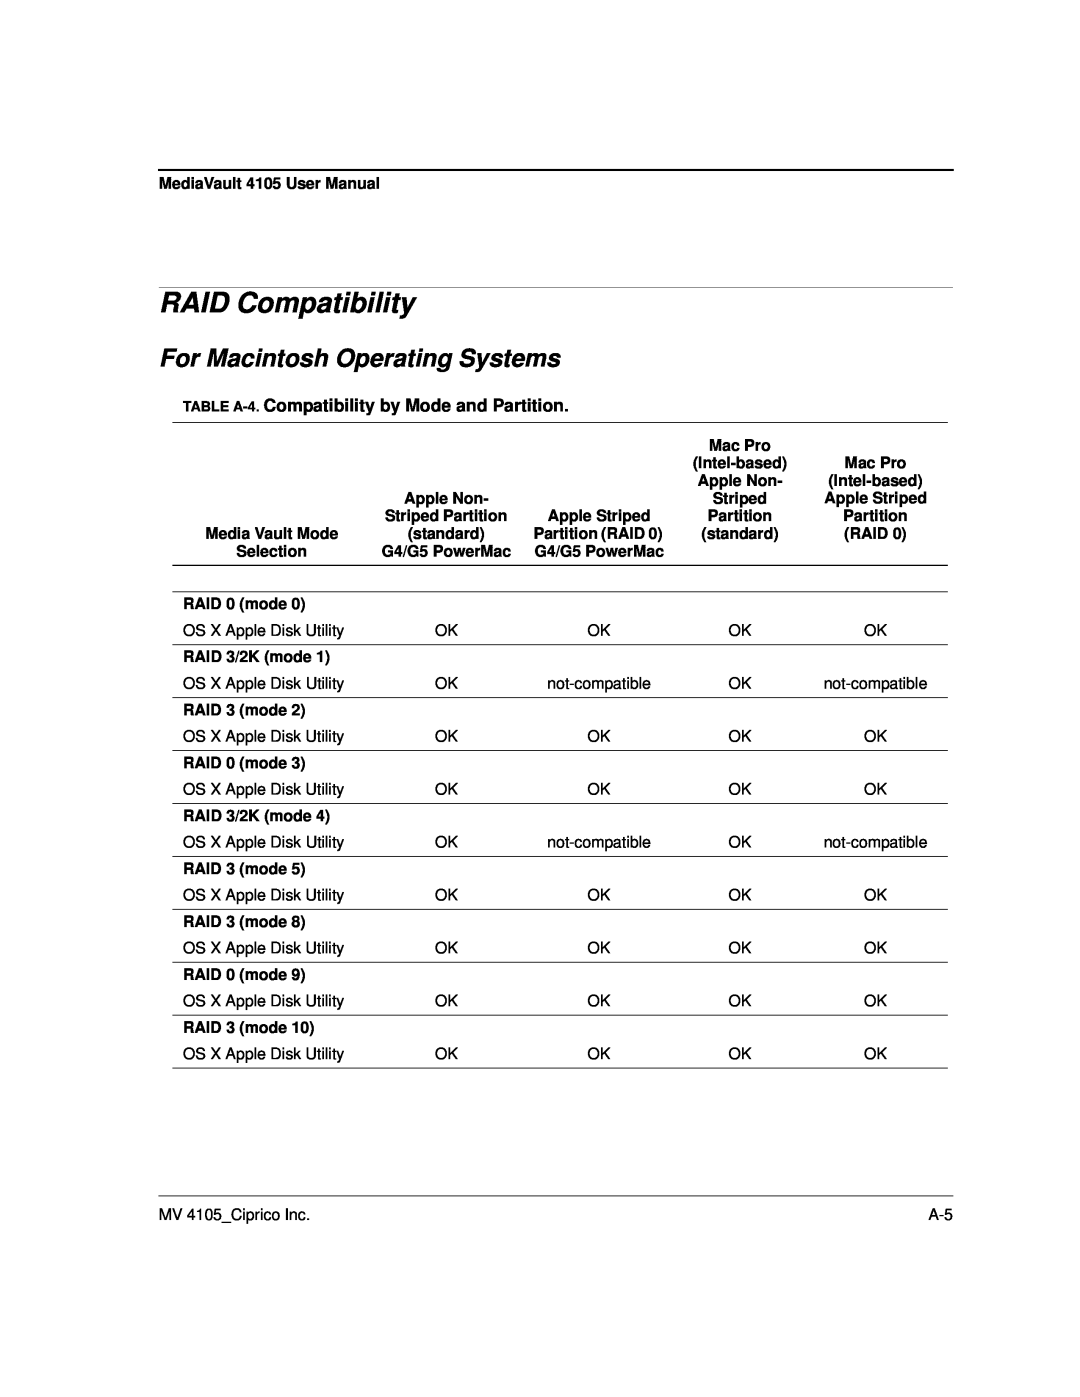 Ciprico 4105 Series RAID Compatibility, For Macintosh Operating Systems, TABLE A-4. Compatibility by Mode and Partition 